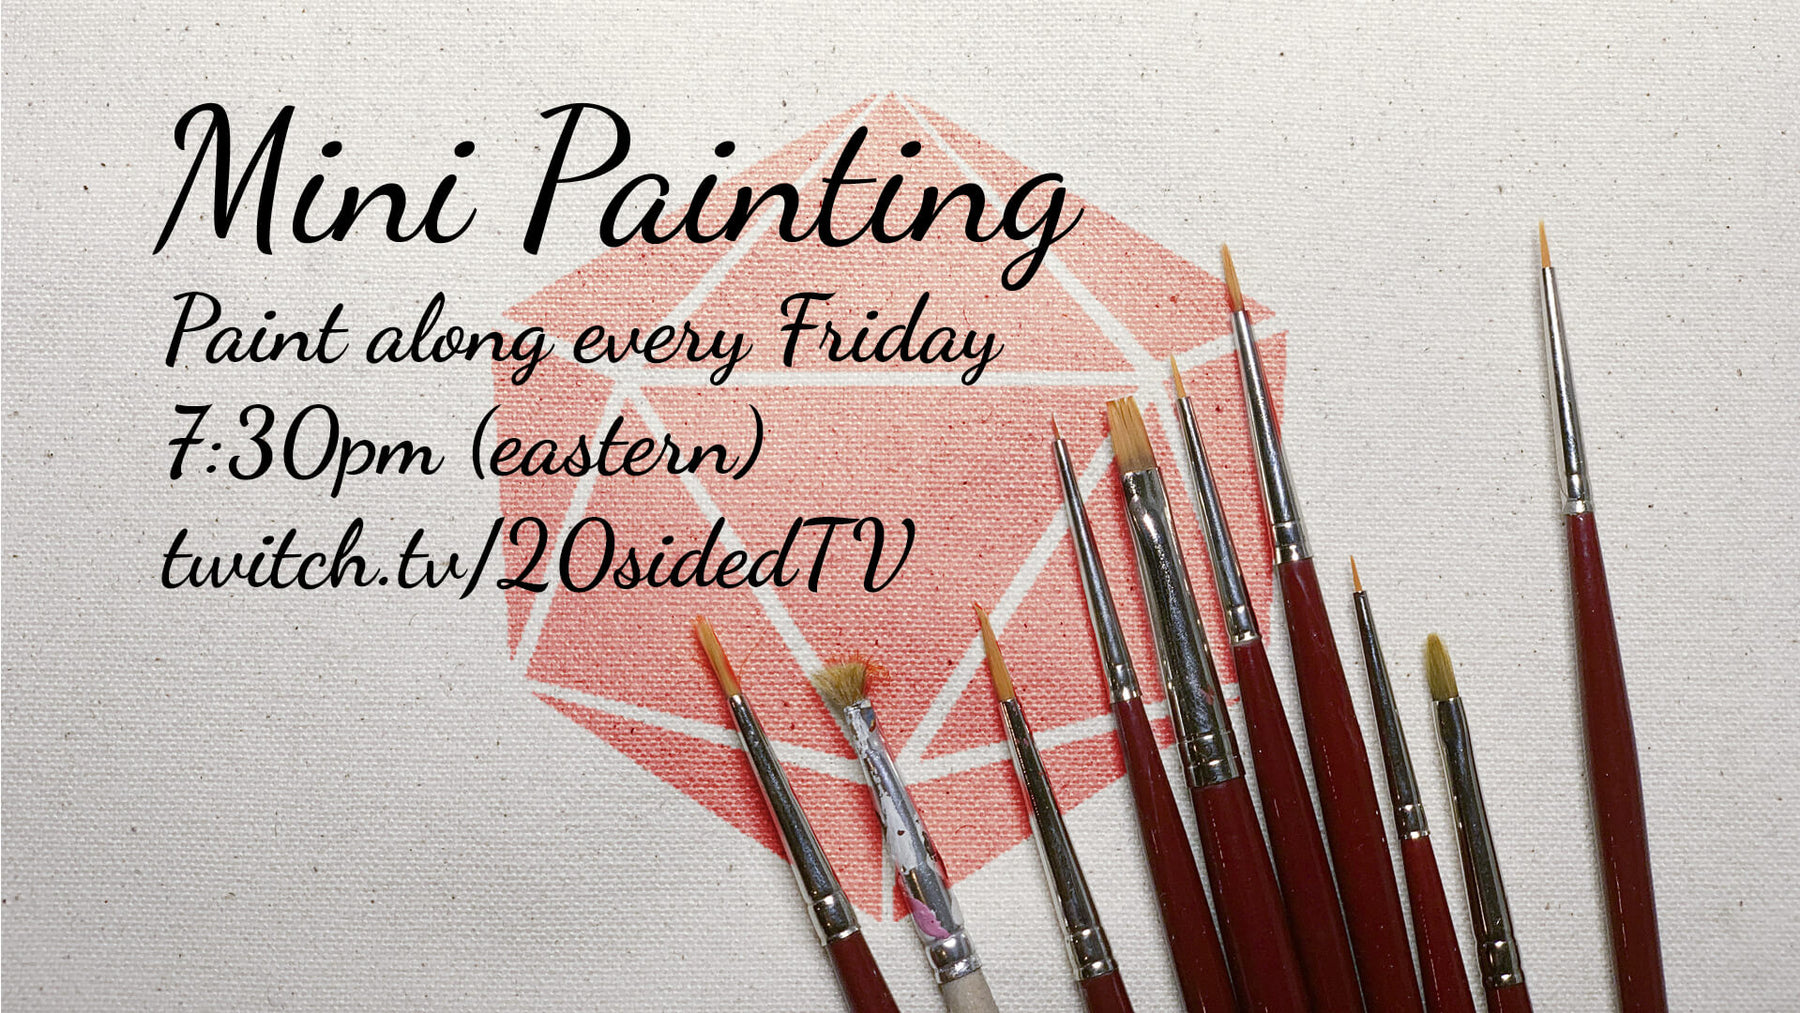 Mini Painting Paint Along every Friday at 7:30pm Eastern on twitch.tv/20sidedtv